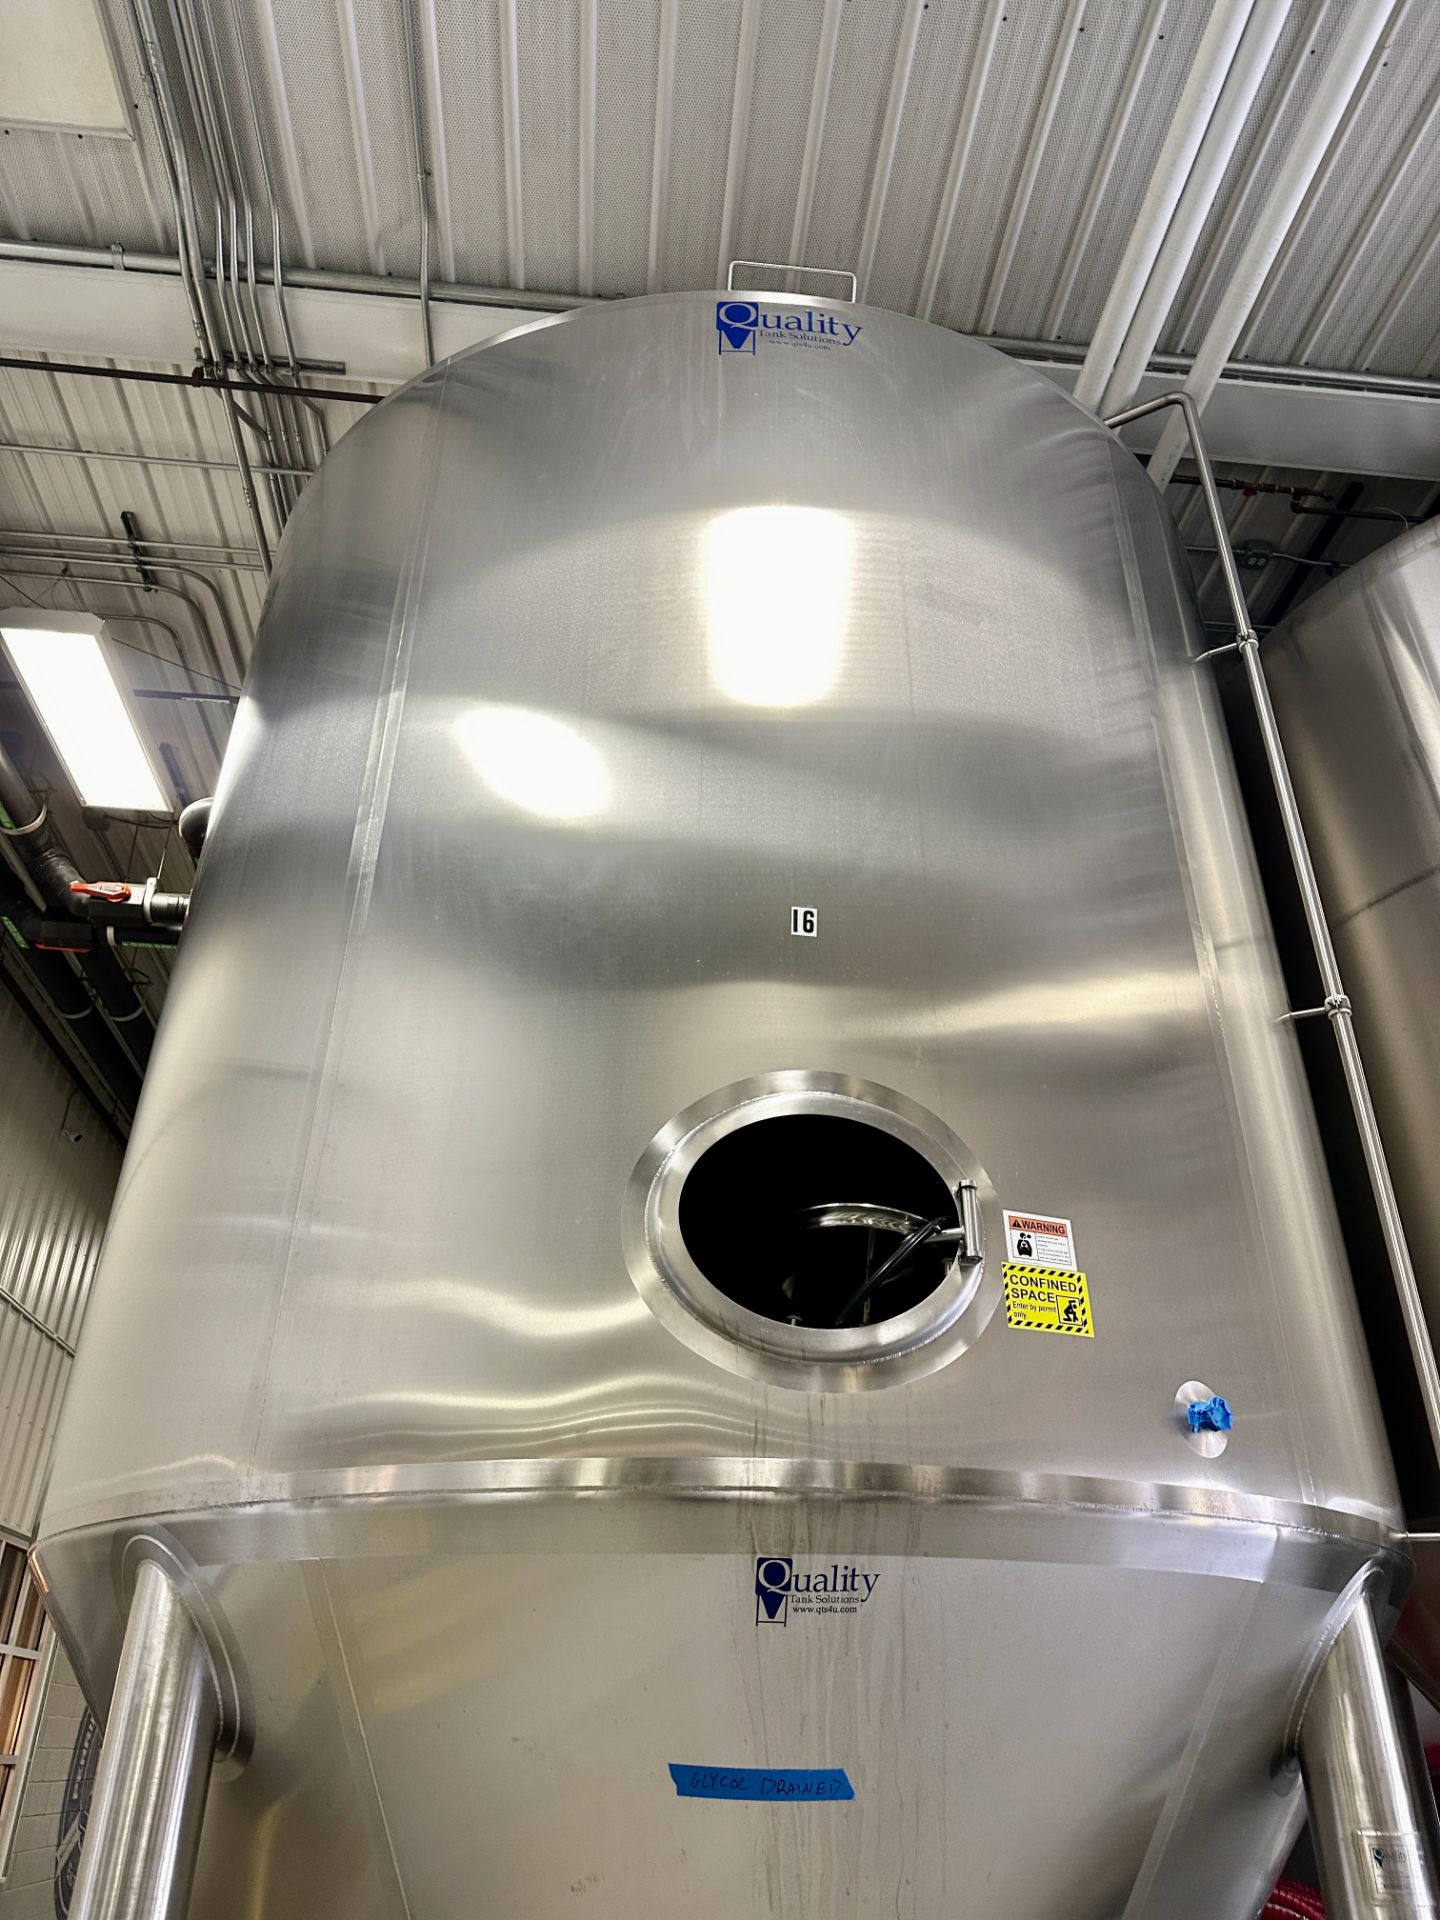 2020 Quality Tank (QTS) 150 BBL FV or 5,500 Gal Max Capacity Jacketed Fermentation Tank, Glycol Jack - Image 3 of 8